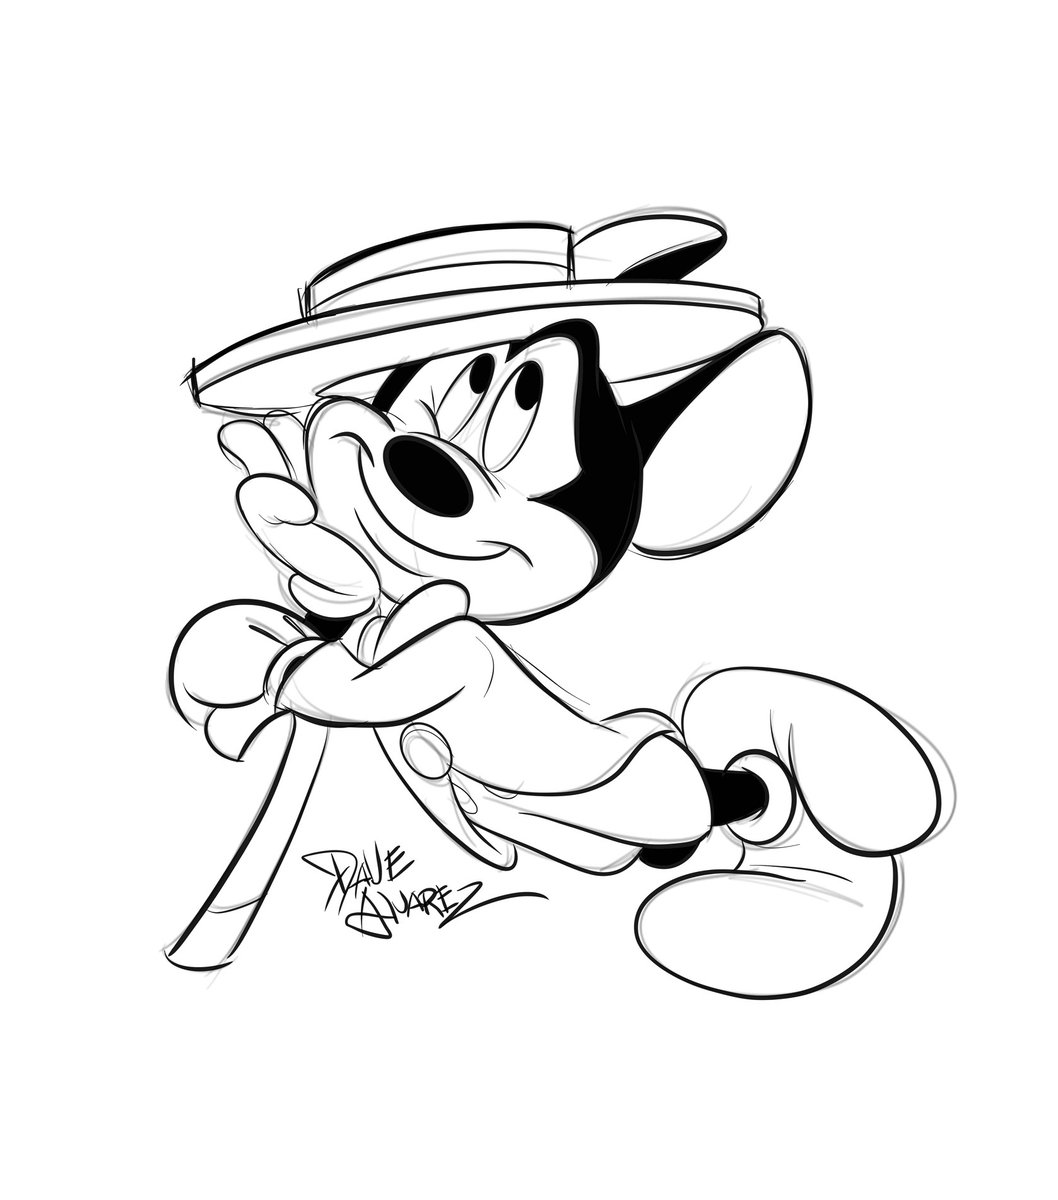 Yesterday was #quickiemickey day. I missed it, but here's mine for the record. I have a thing for Freddie Moore's Mickey Mouse. Can you tell? #mickeymouse #disney #waltdisney #disneyanimation #art #artist #fredmoore #DaveAlvarez #challenge